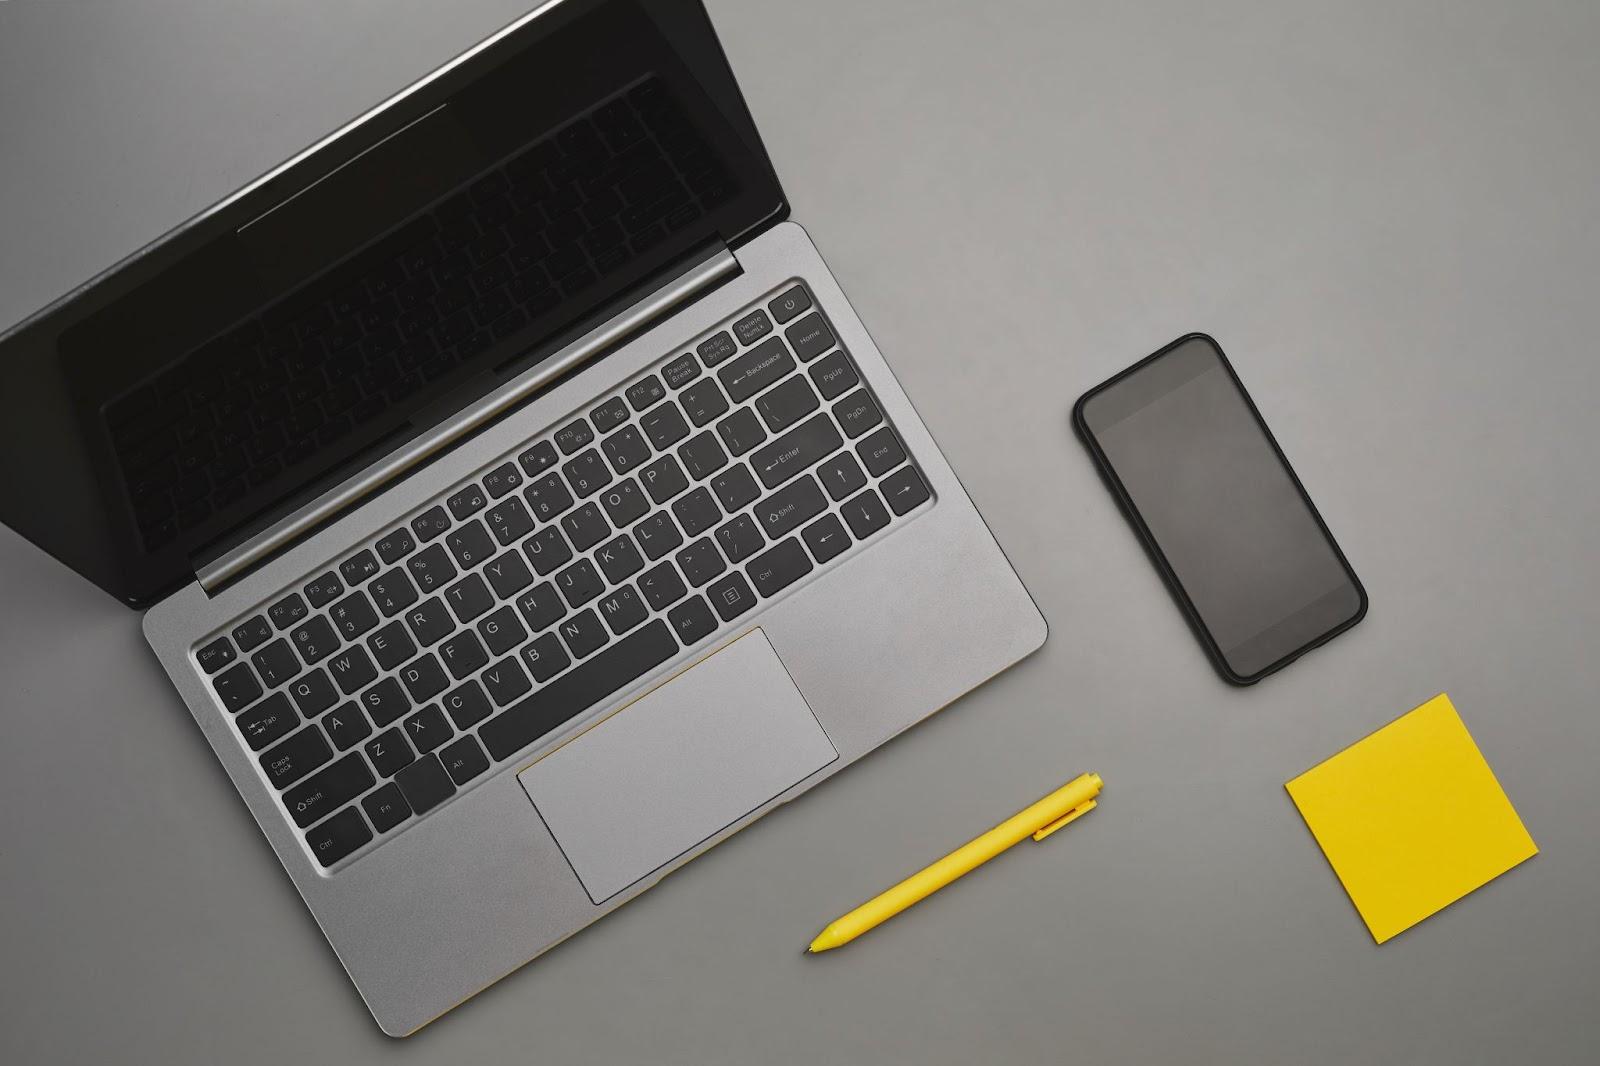 Laptop and smartphone laid out on a minimalist office desk